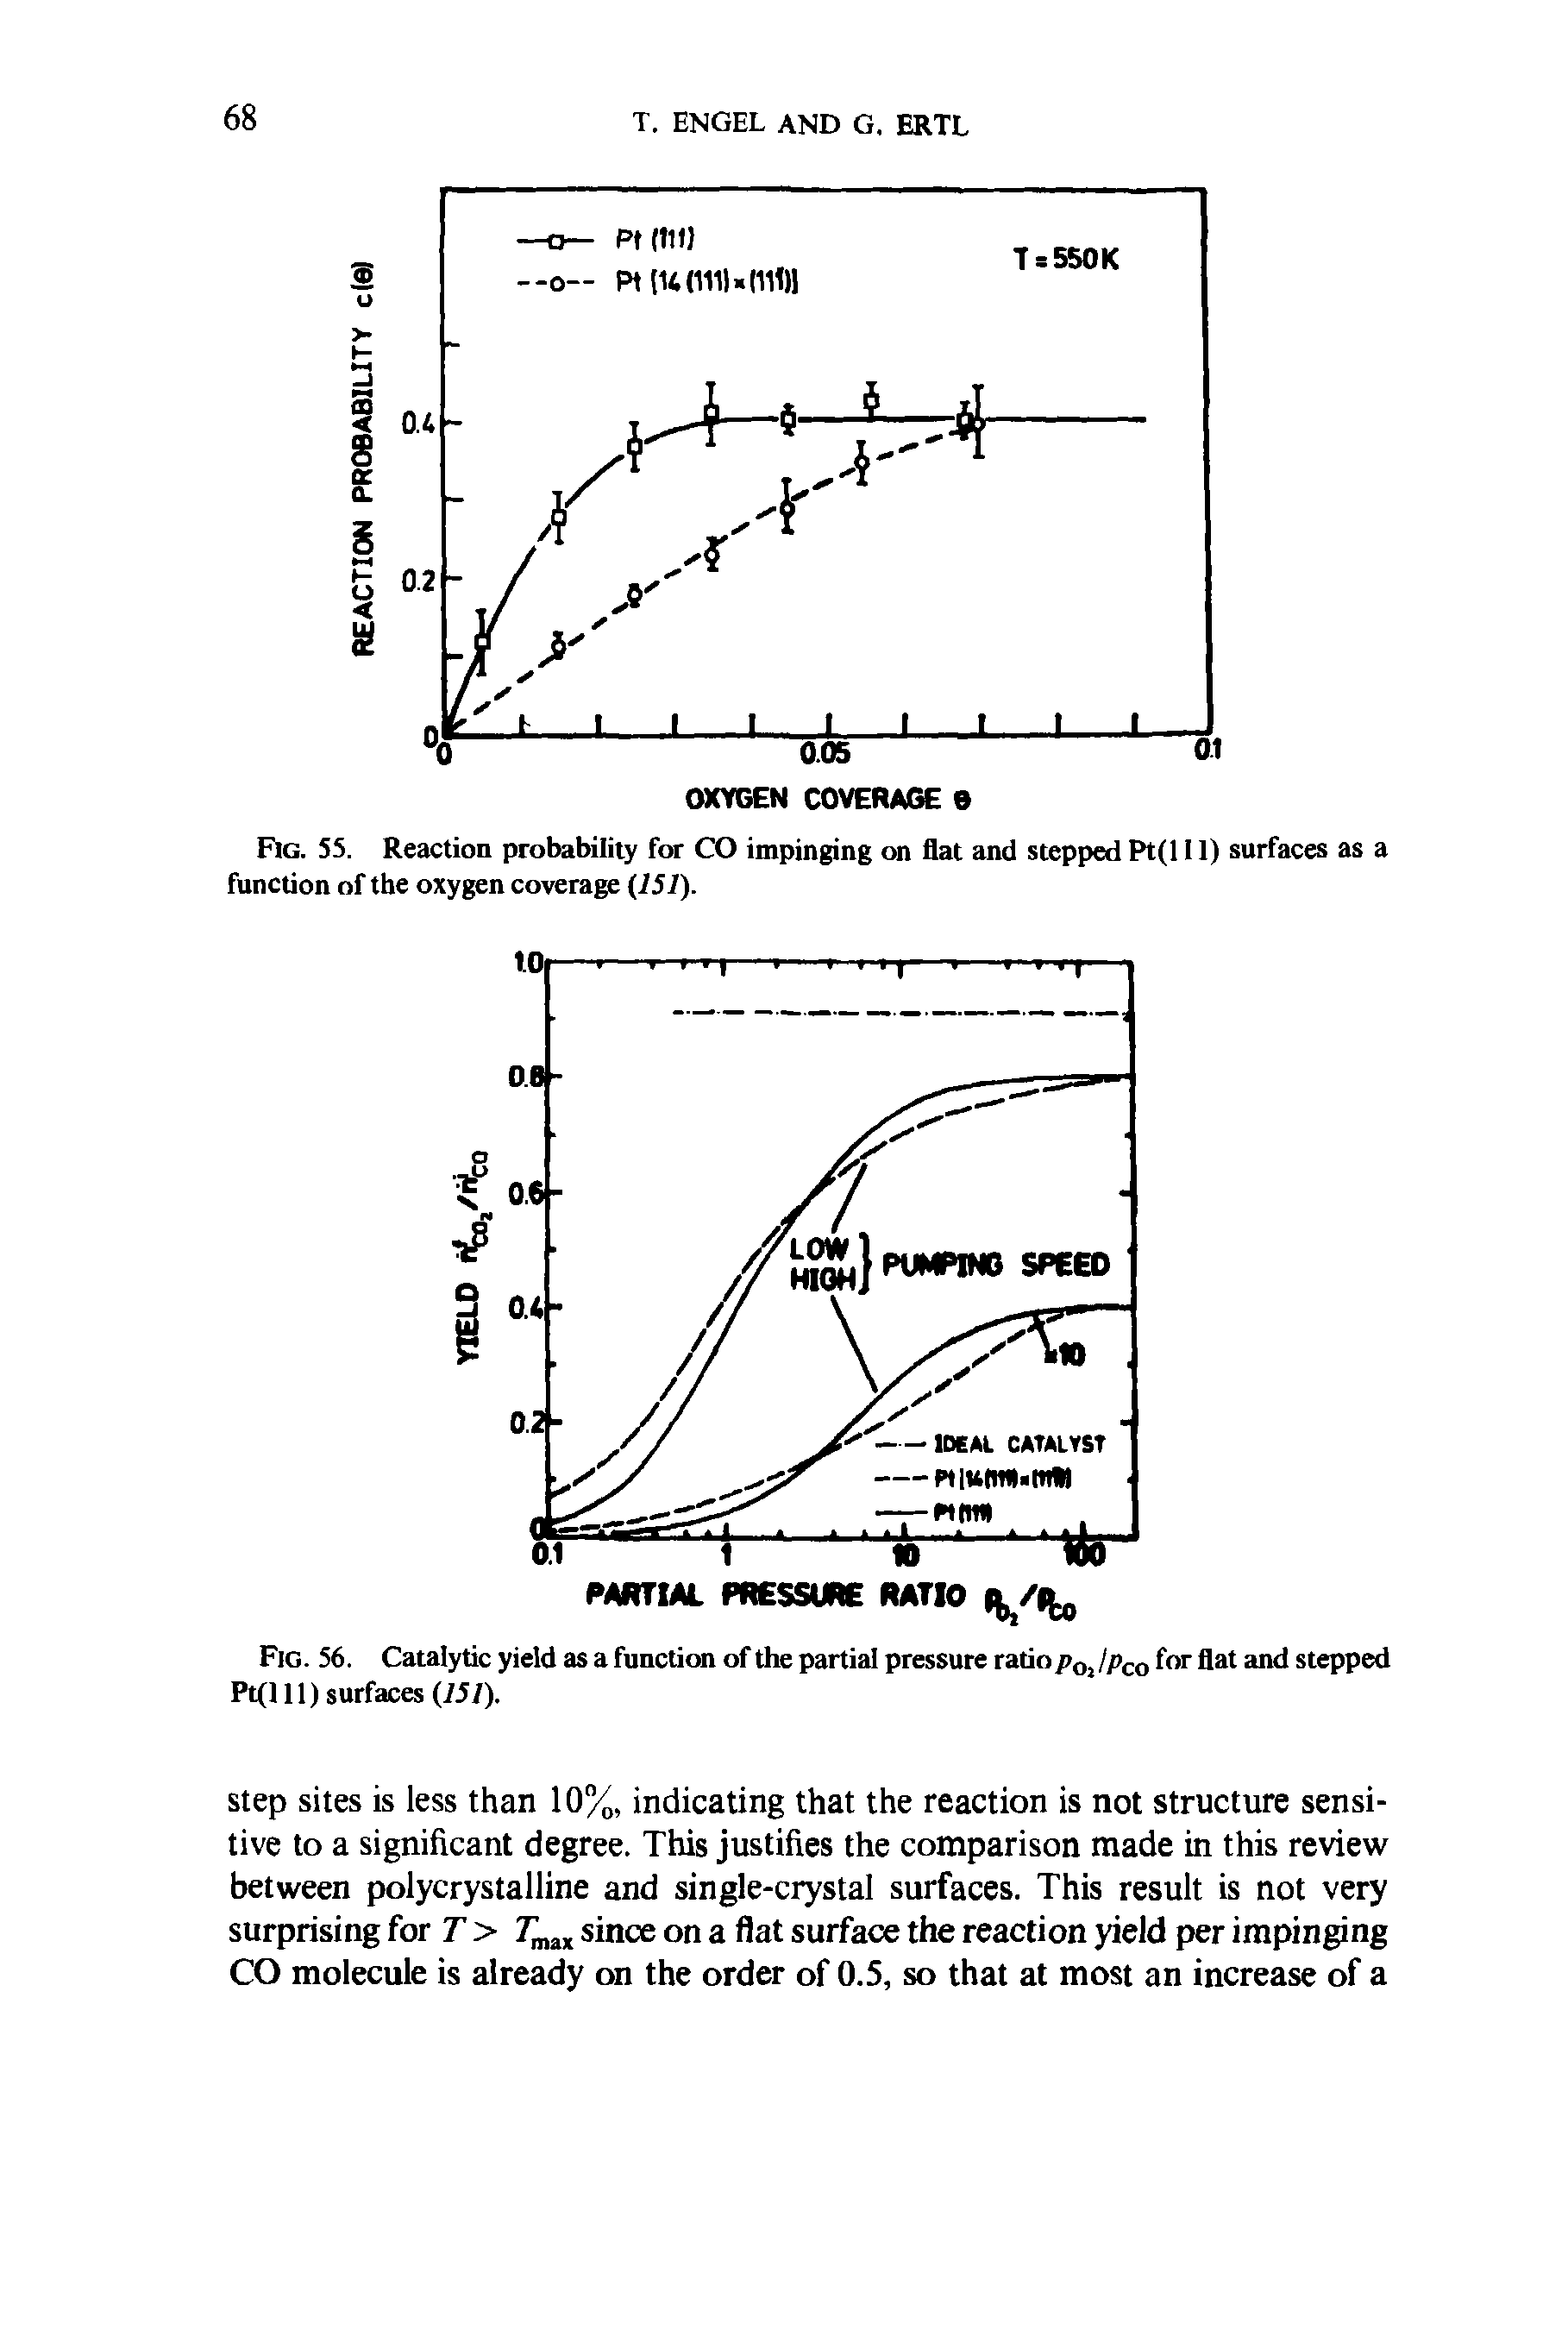 Fig. 56. Catalytic yield as a function of the partial pressure ratio p0l lpco for flat and stepped Pt(] 11) surfaces (151).